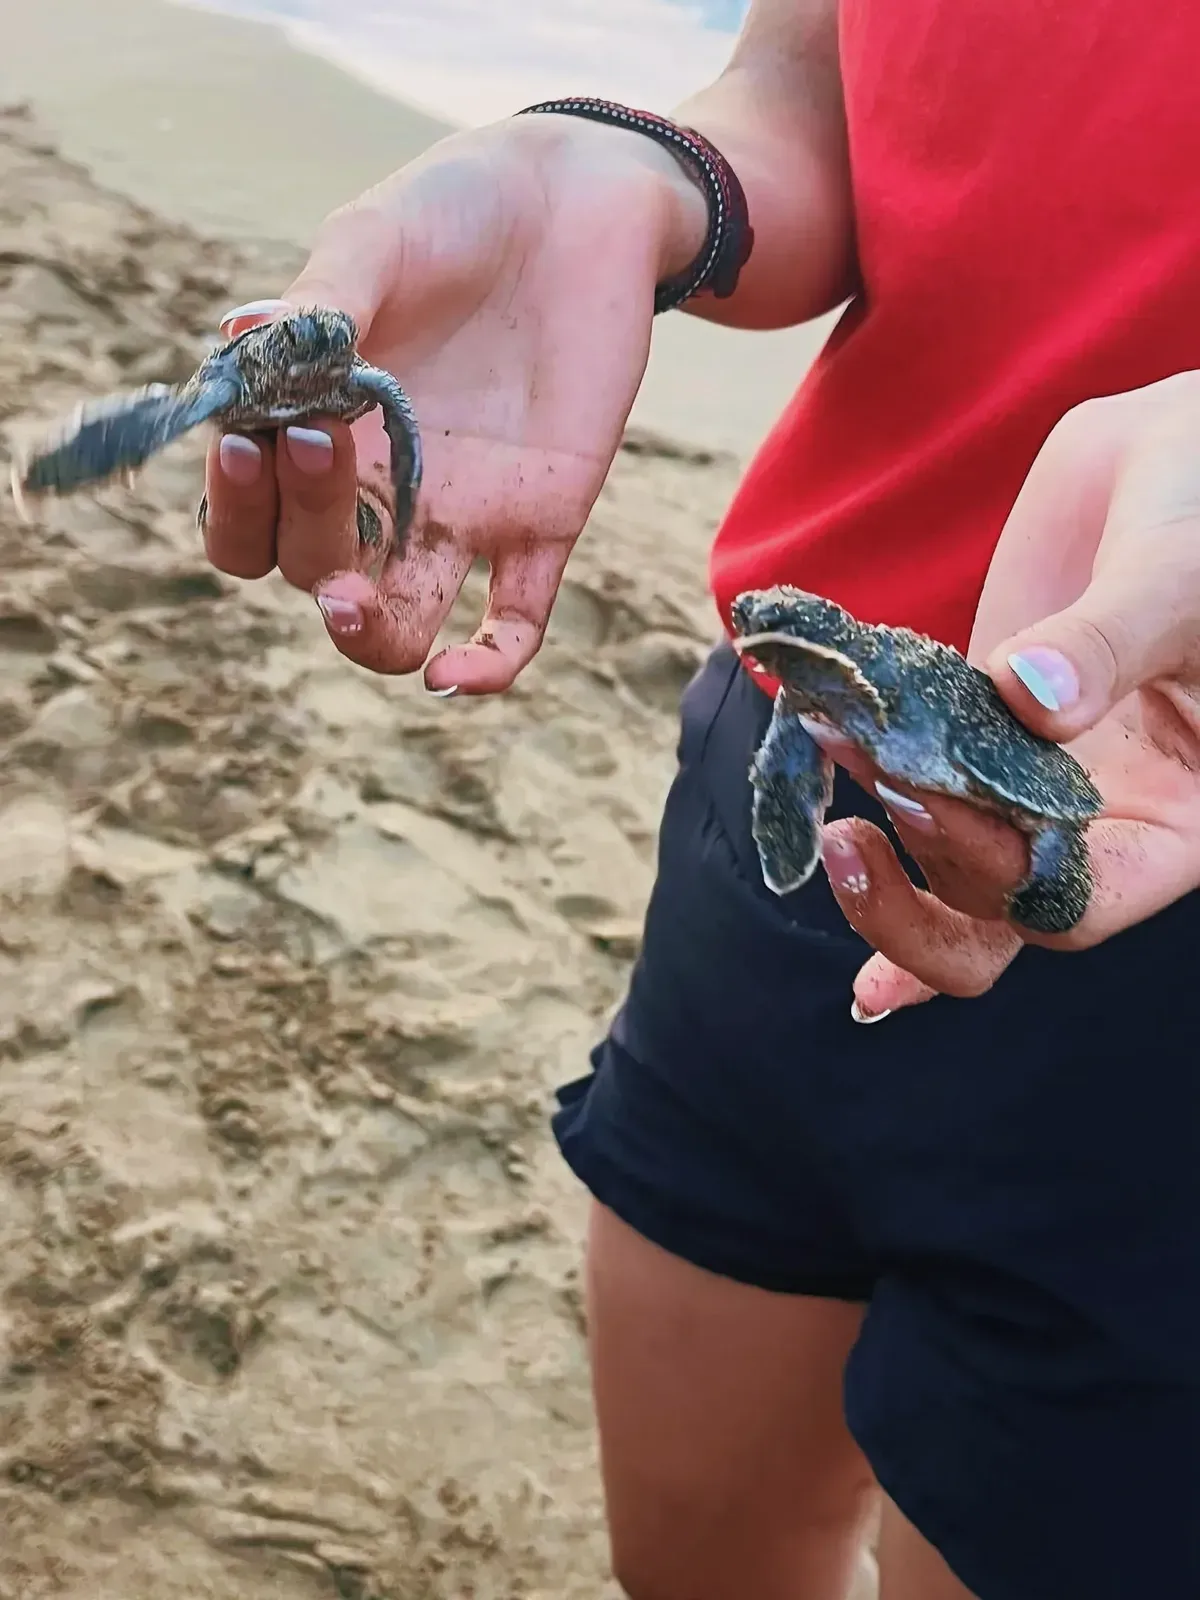 Person holding a baby turtle on a sandy beach